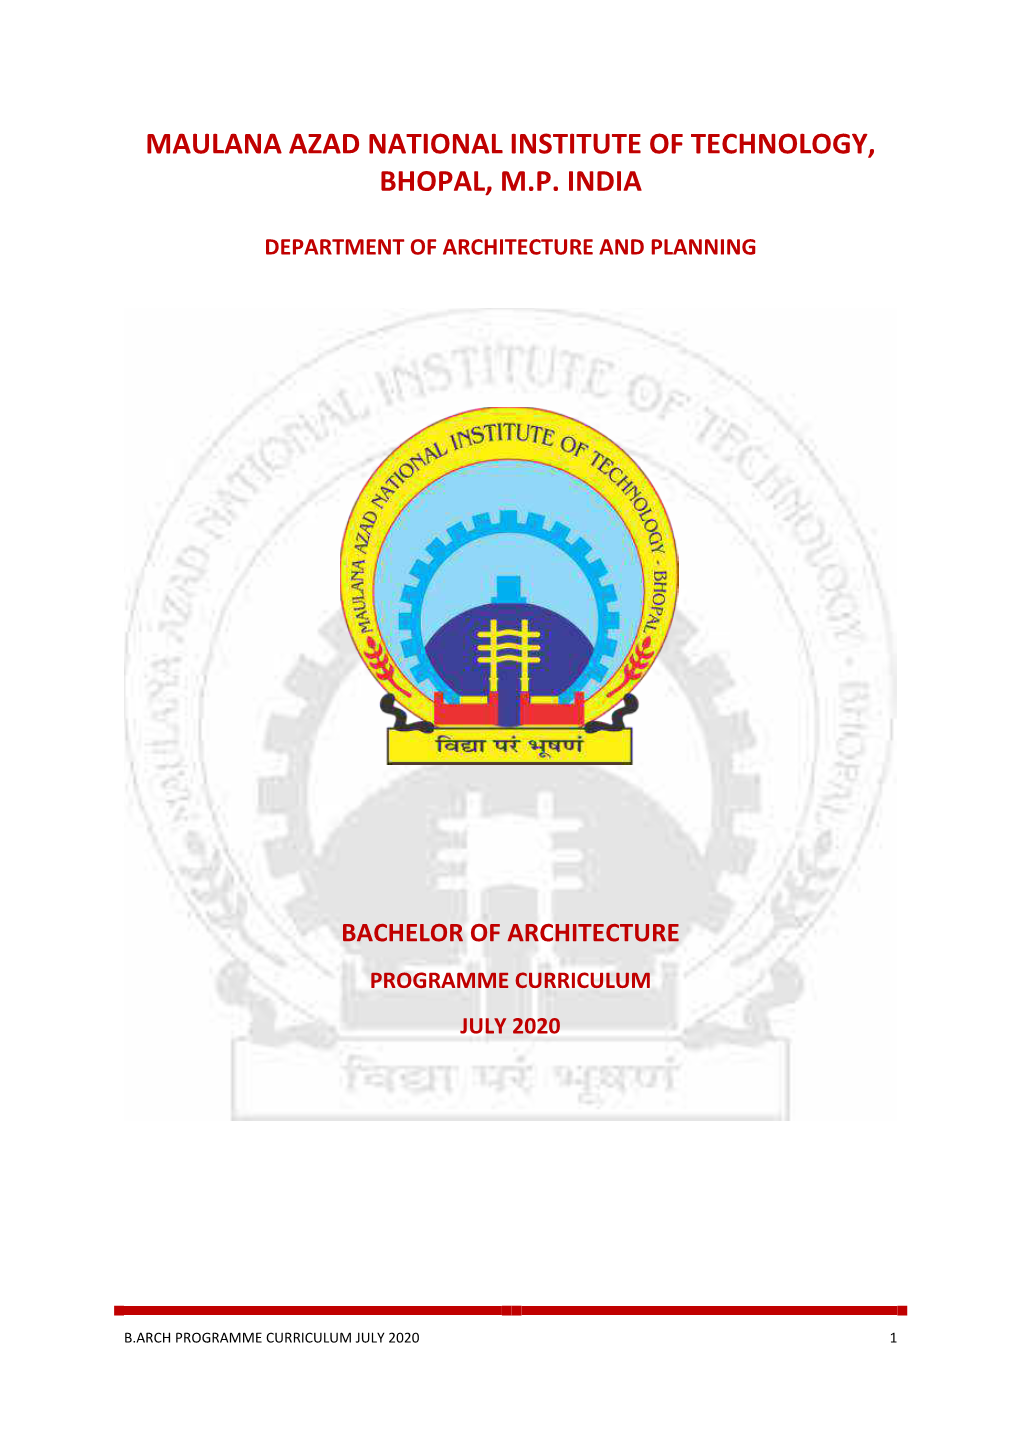 Bachelor of Architecture Programme Curriculum July 2020